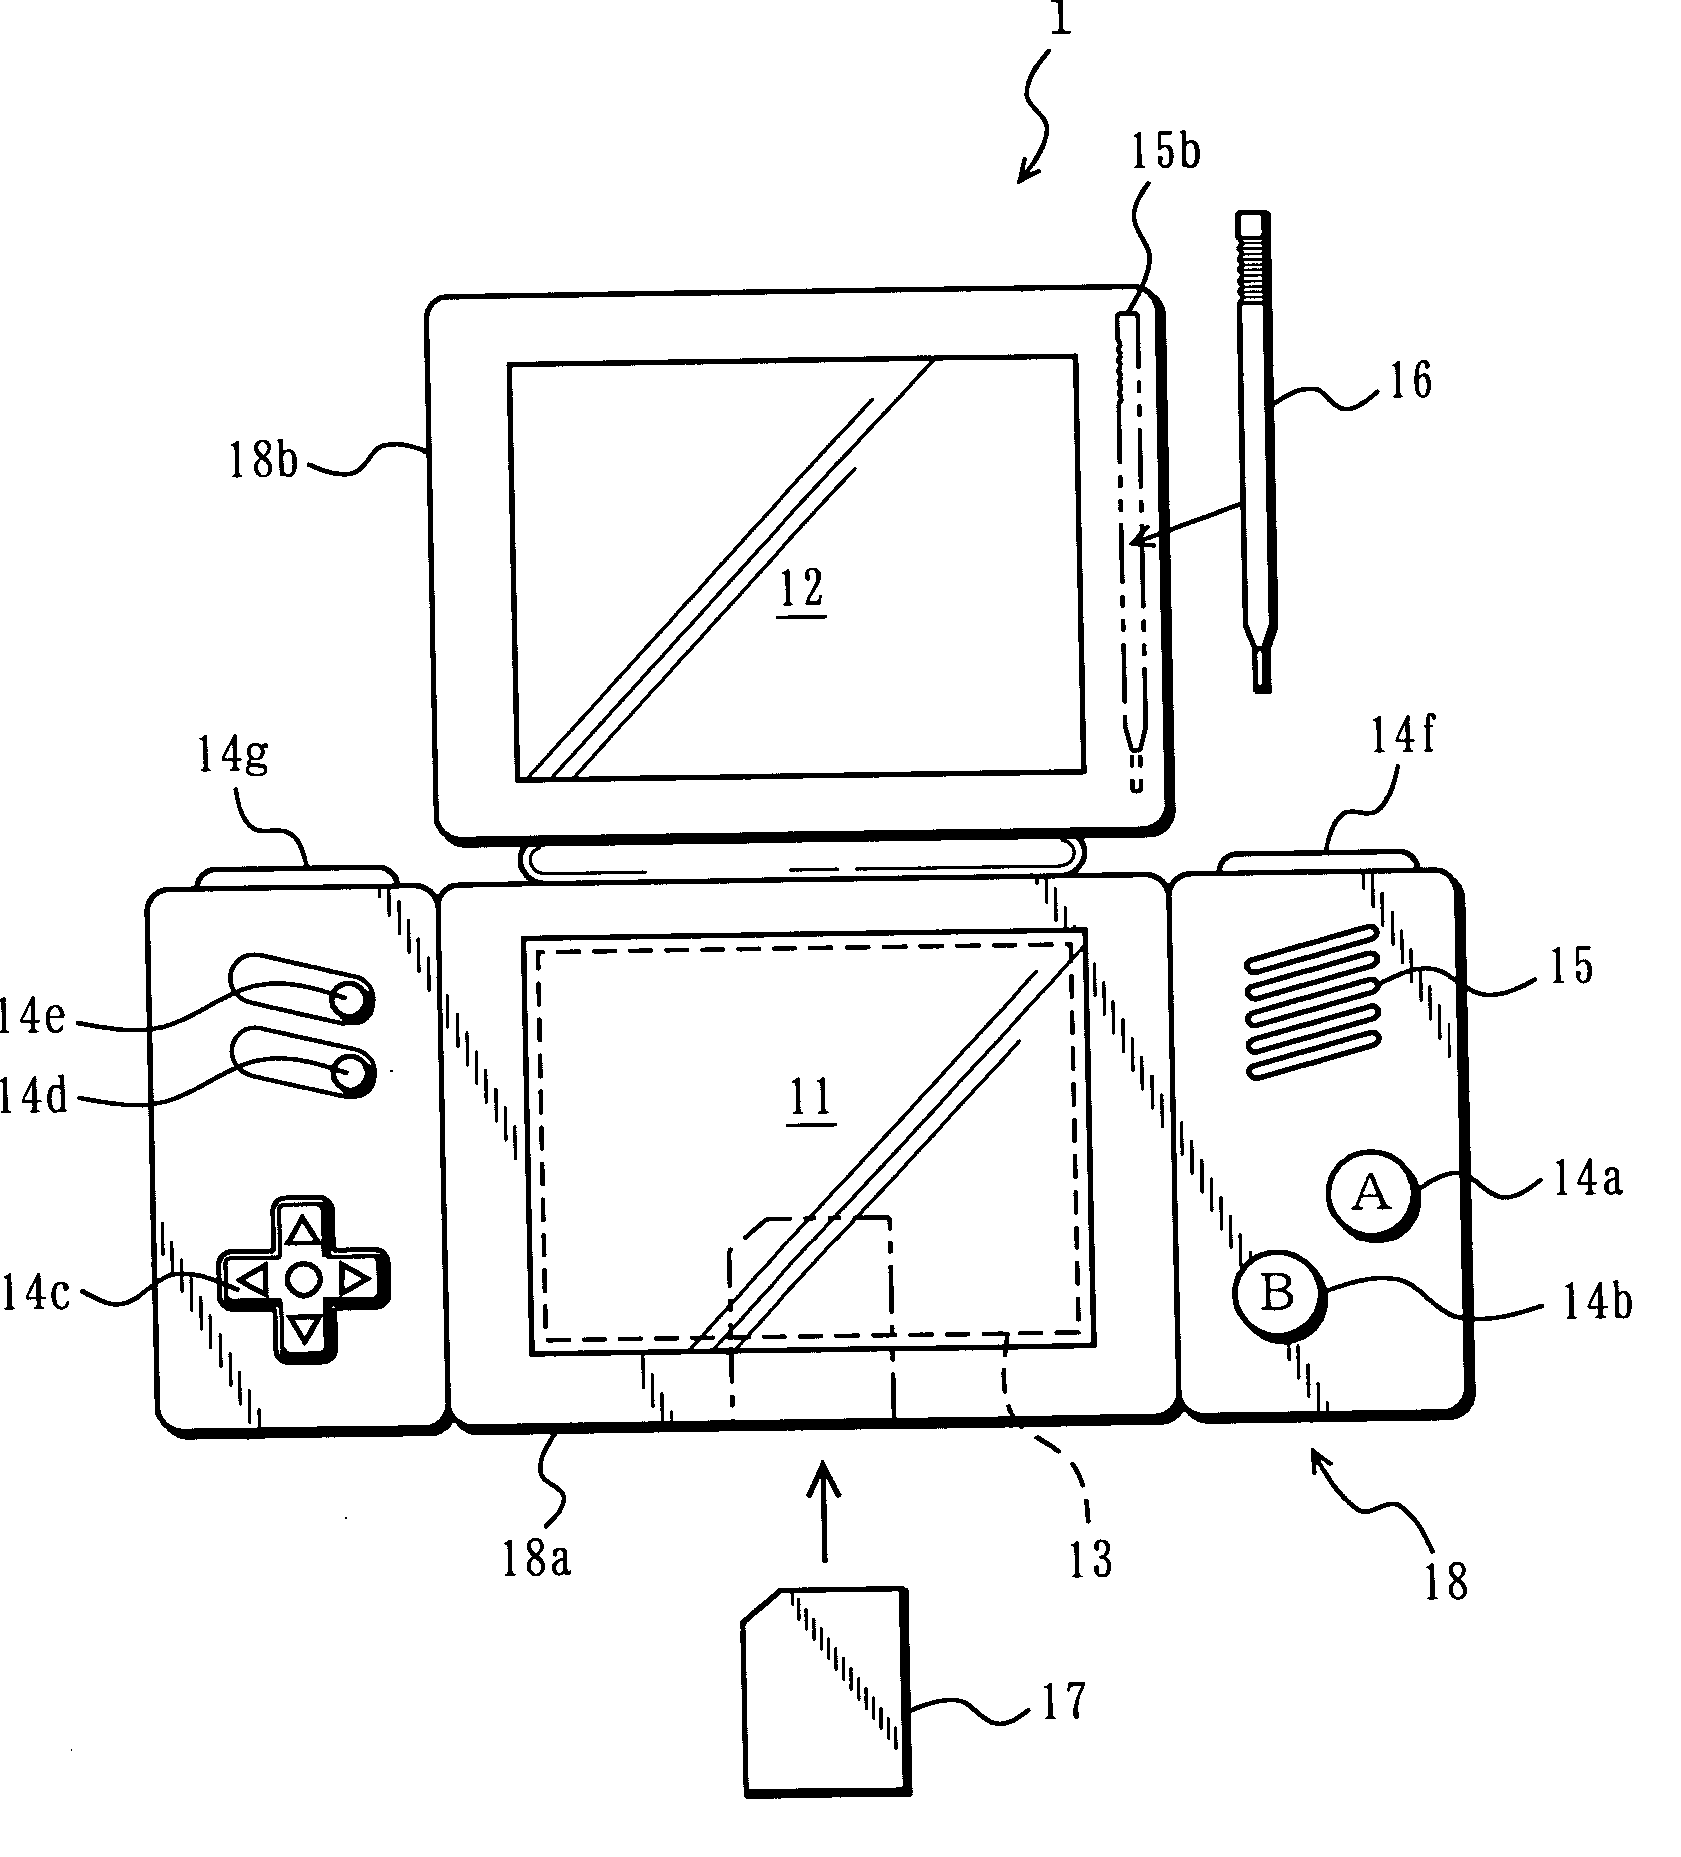 Game system using touch panel input